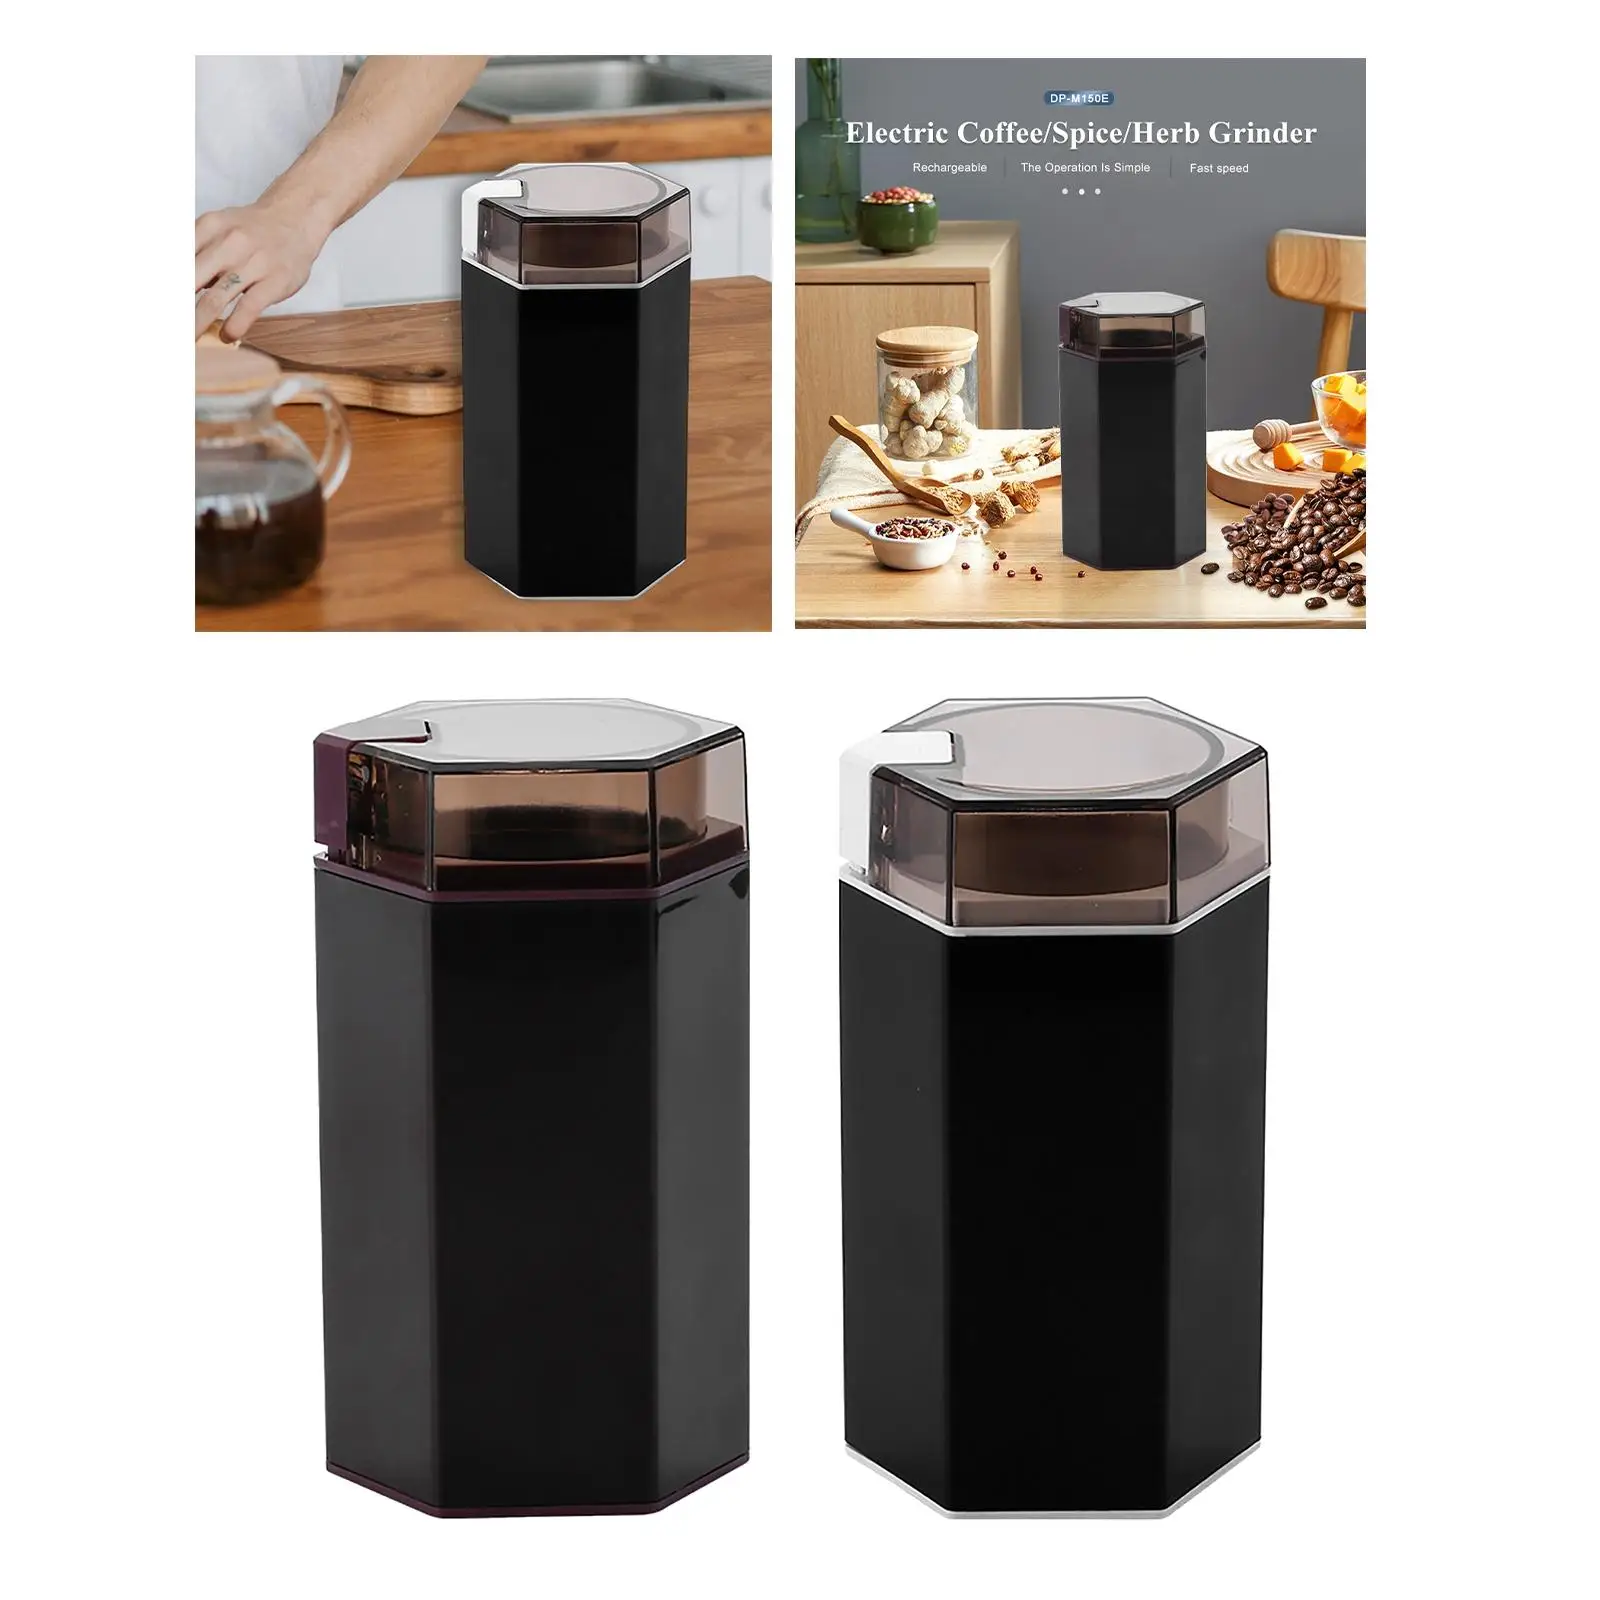 Countertop Electric Coffee Grinder Compact Size Spice Mill 304 Stainless Steel Blade for Herbs Coffee Espresso Latte Home